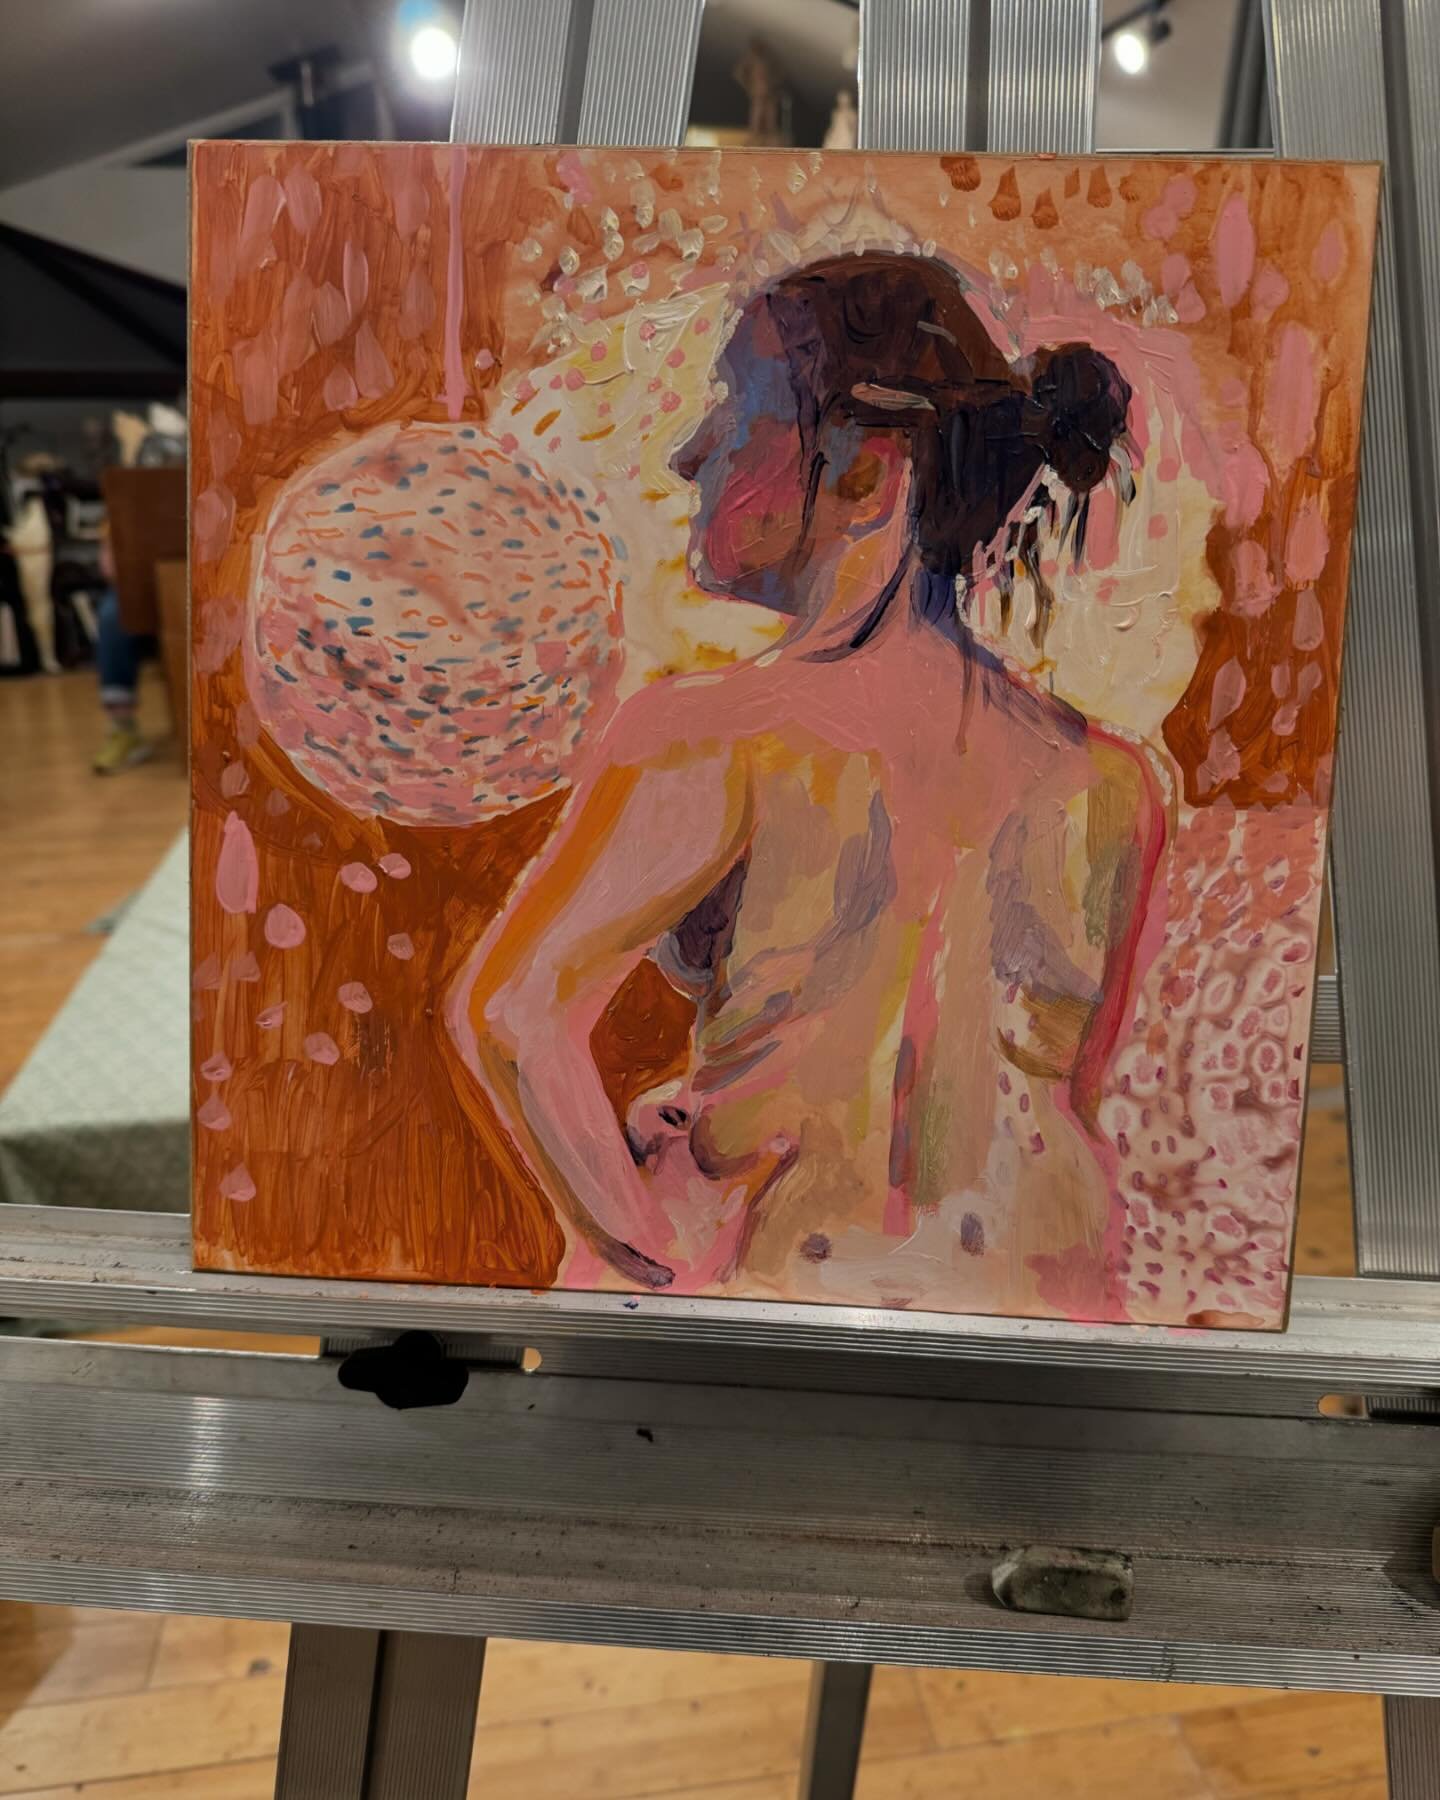 I&rsquo;m working on some large figurative paintings in my studio right now and wanted to get my eyes on a live model to study skin tones in acrylic, it&rsquo;s been awhile since I painted flesh. I&rsquo;d heard about a life drawing group on the isla